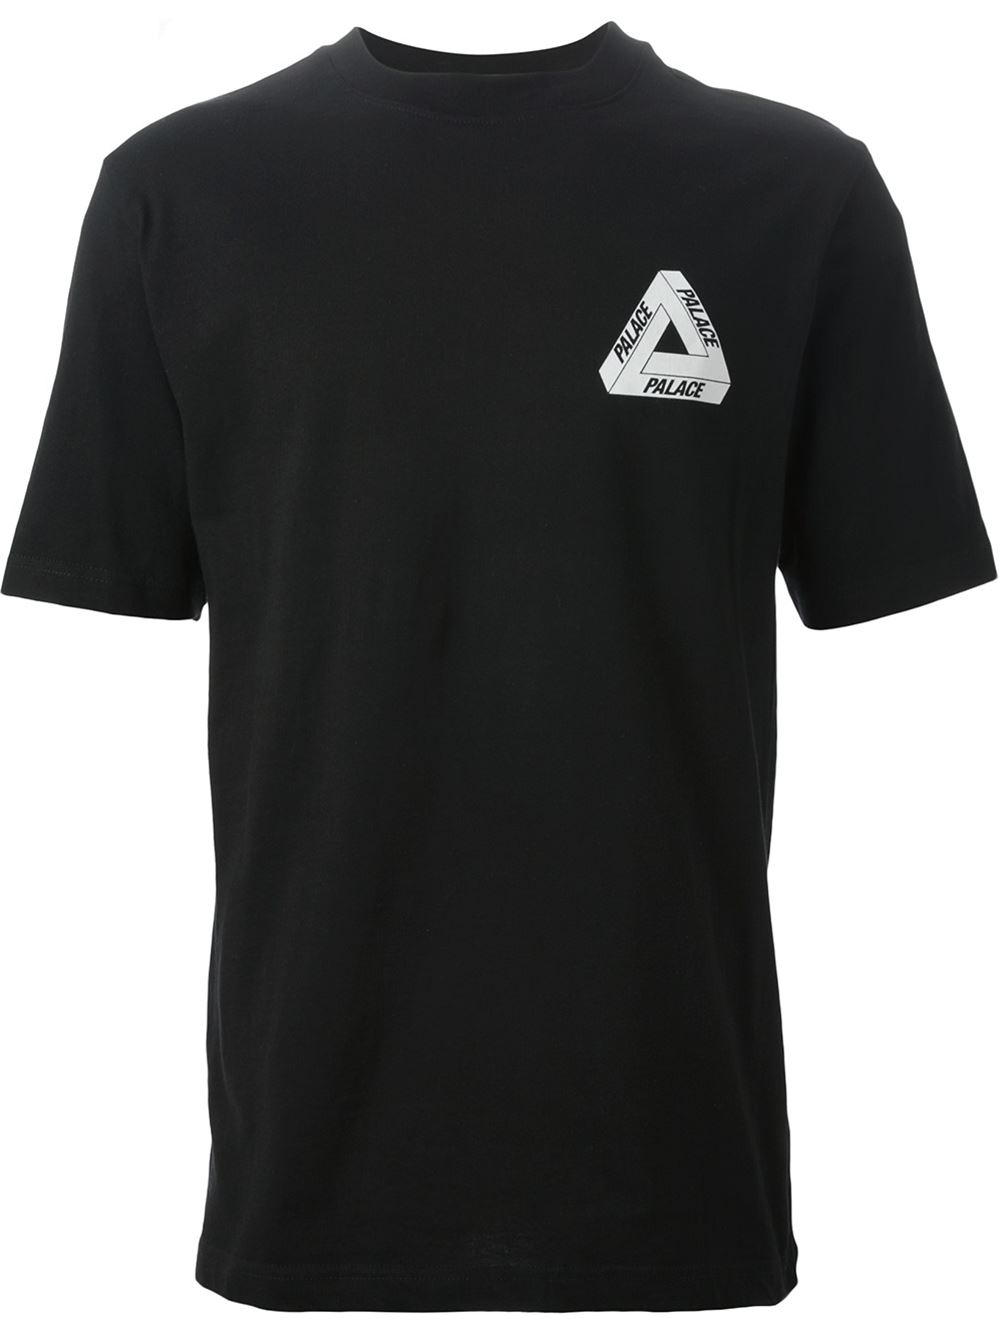 Lyst - Palace Logo T-Shirt in Black for Men